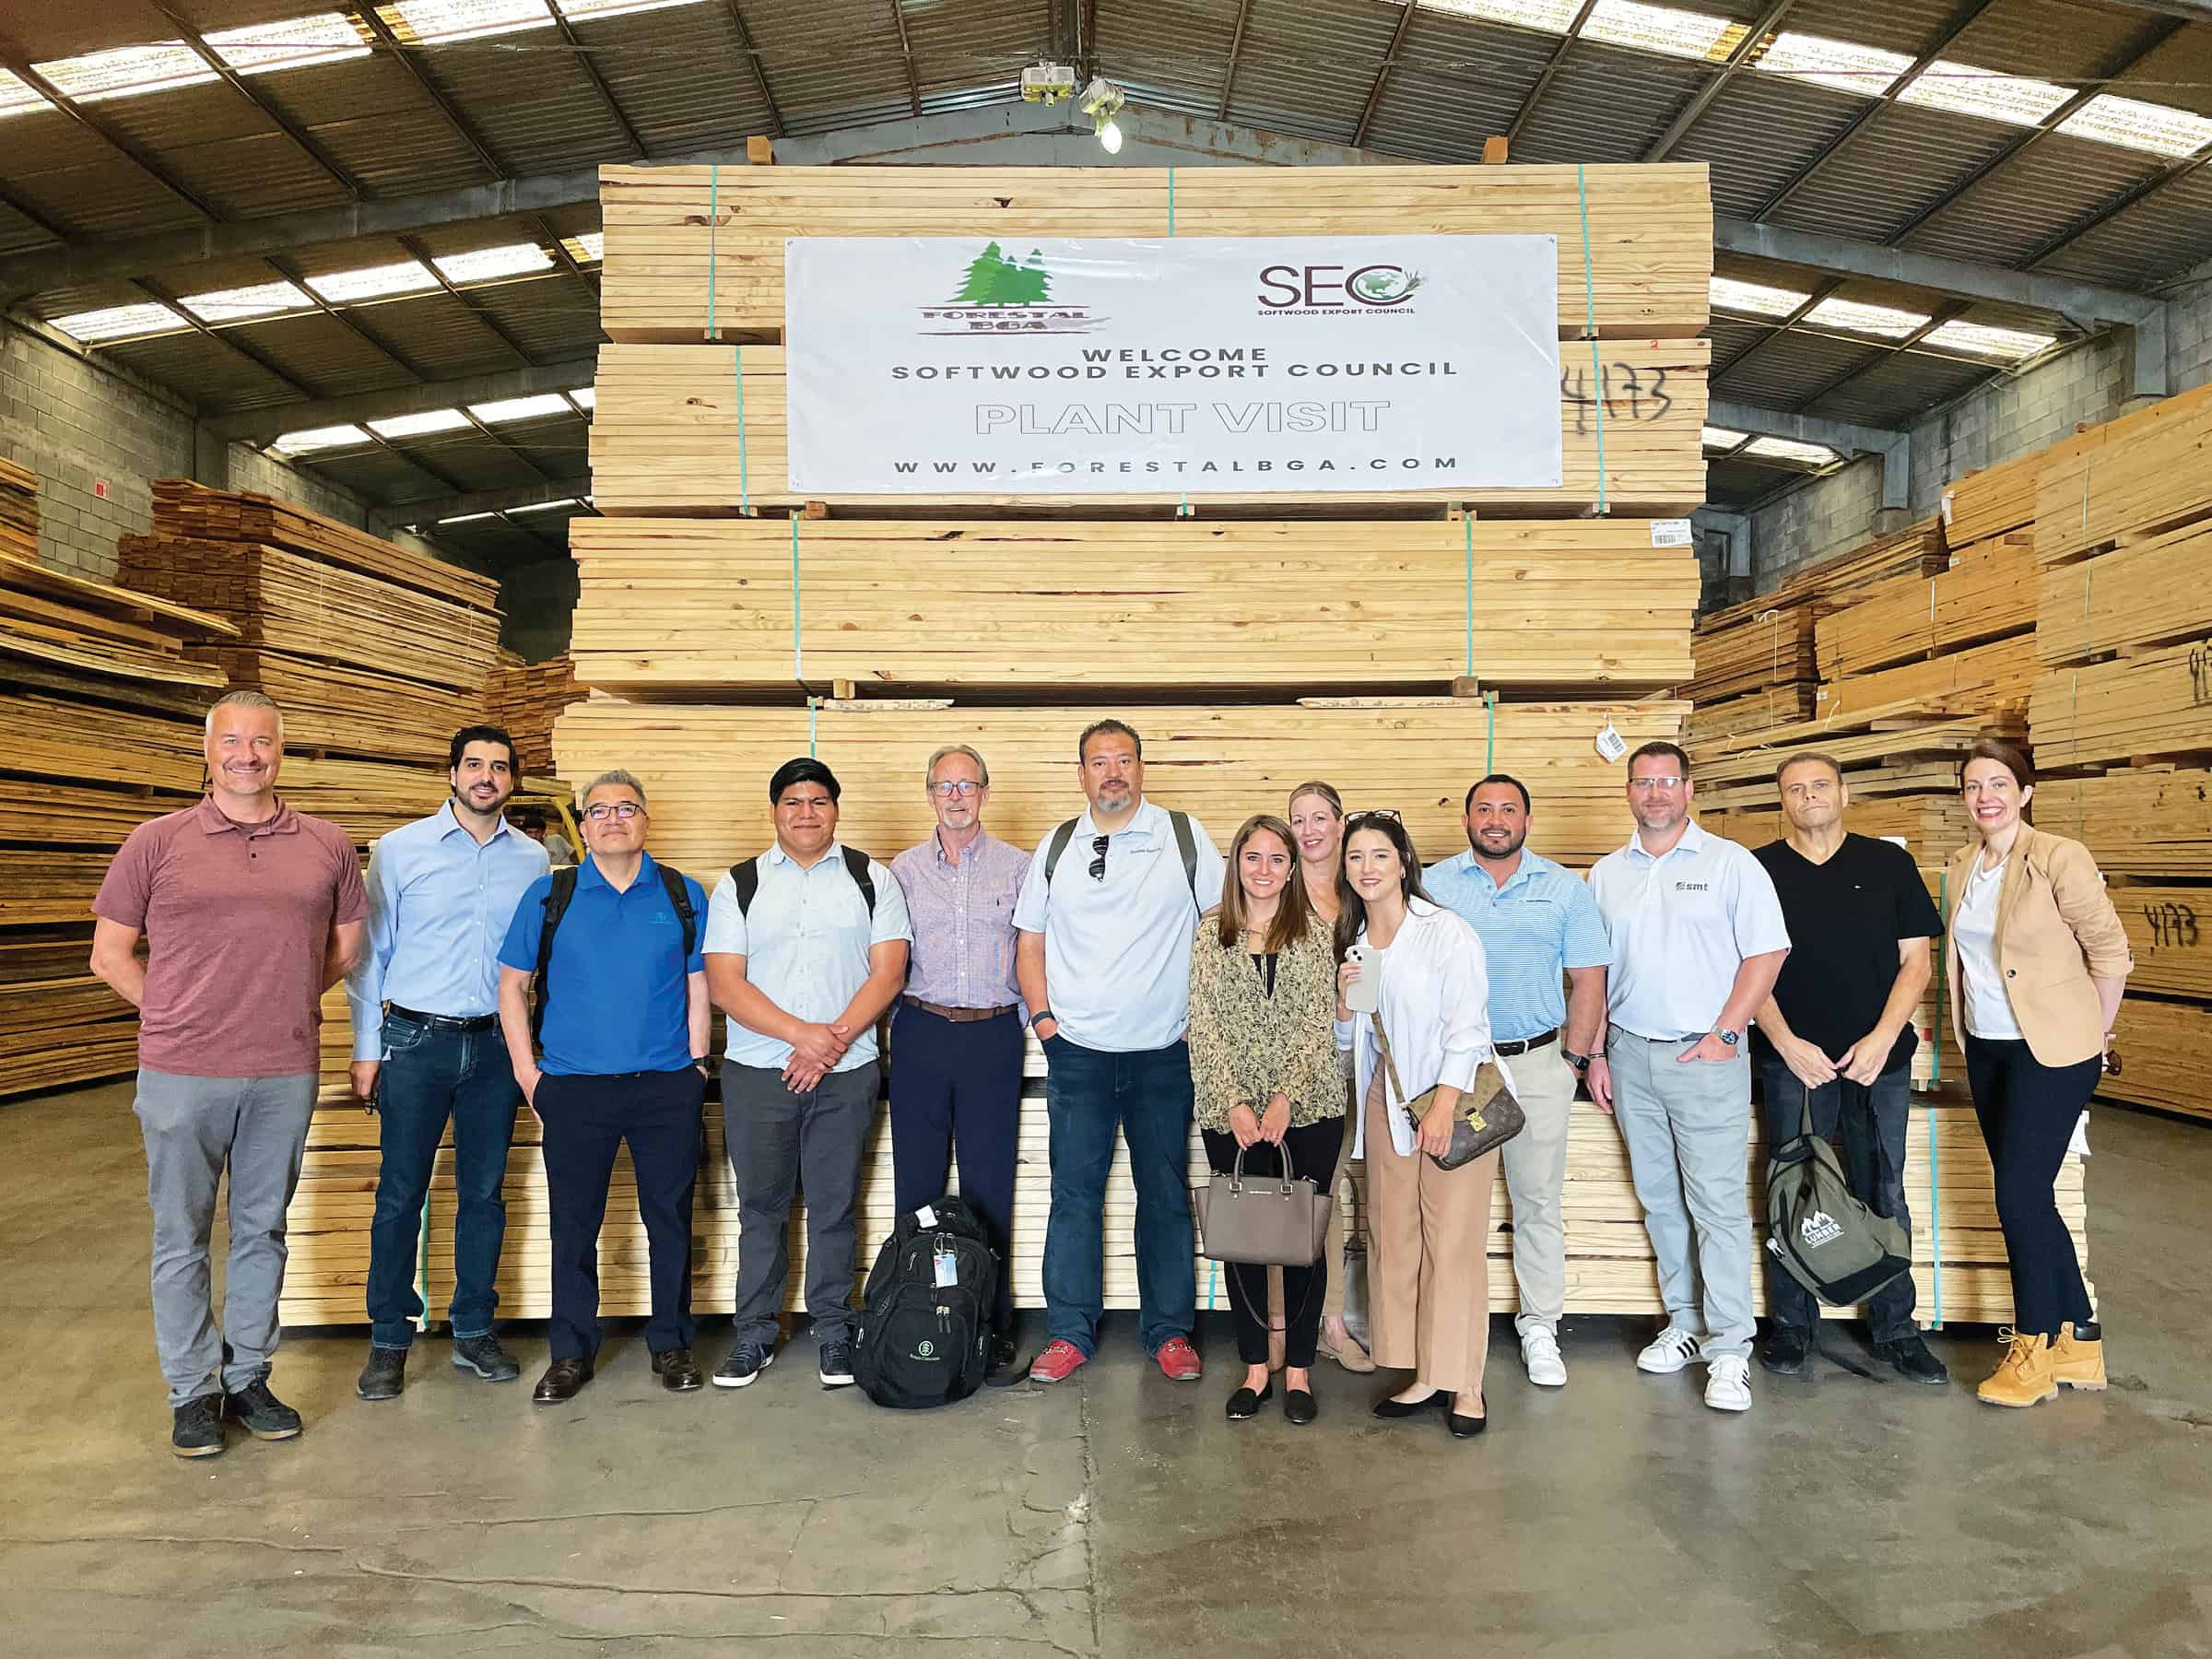 Softwood Export Council Trade Missions Generate International Sales For U.S Suppliers 3